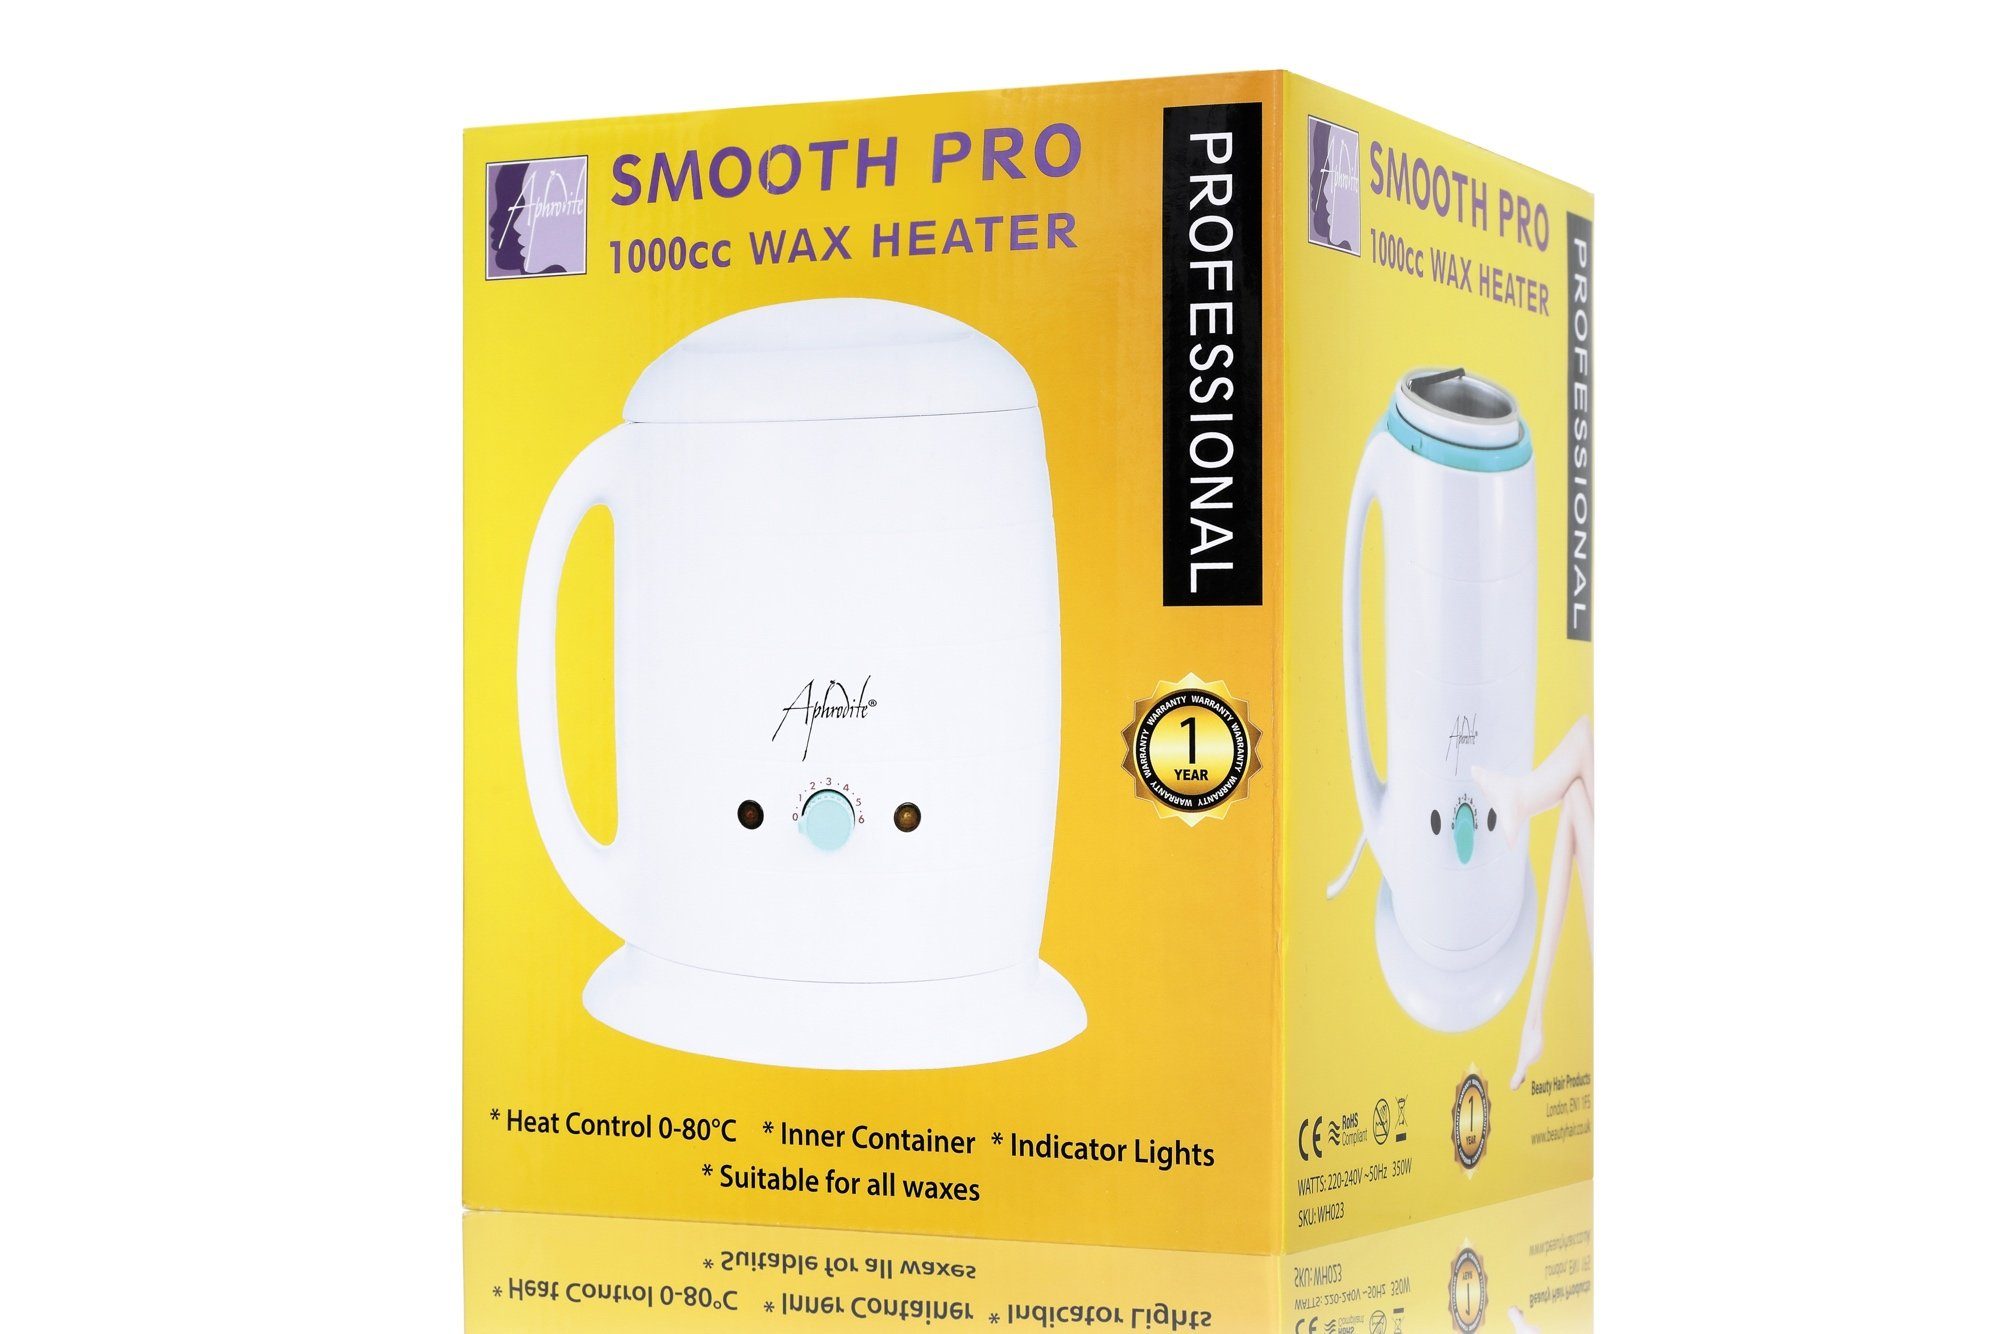 Damaged Box Smooth Pro Wax Heater 1000cc - Beauty Hair Products LtdWax Heaters